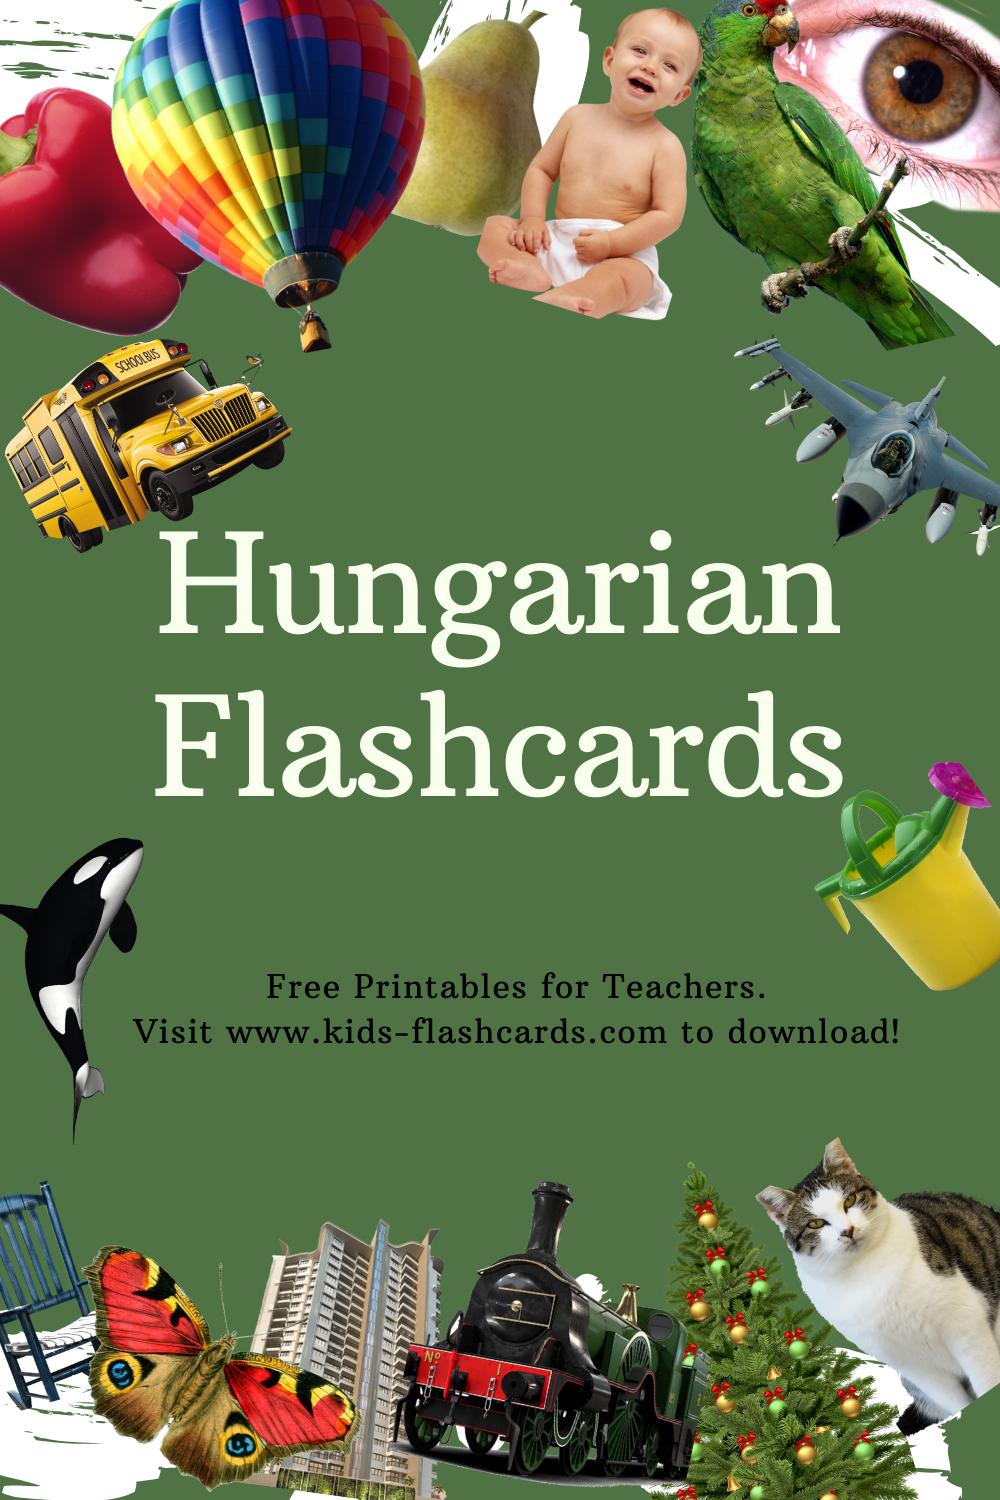 Worksheets to learn Hungarian language